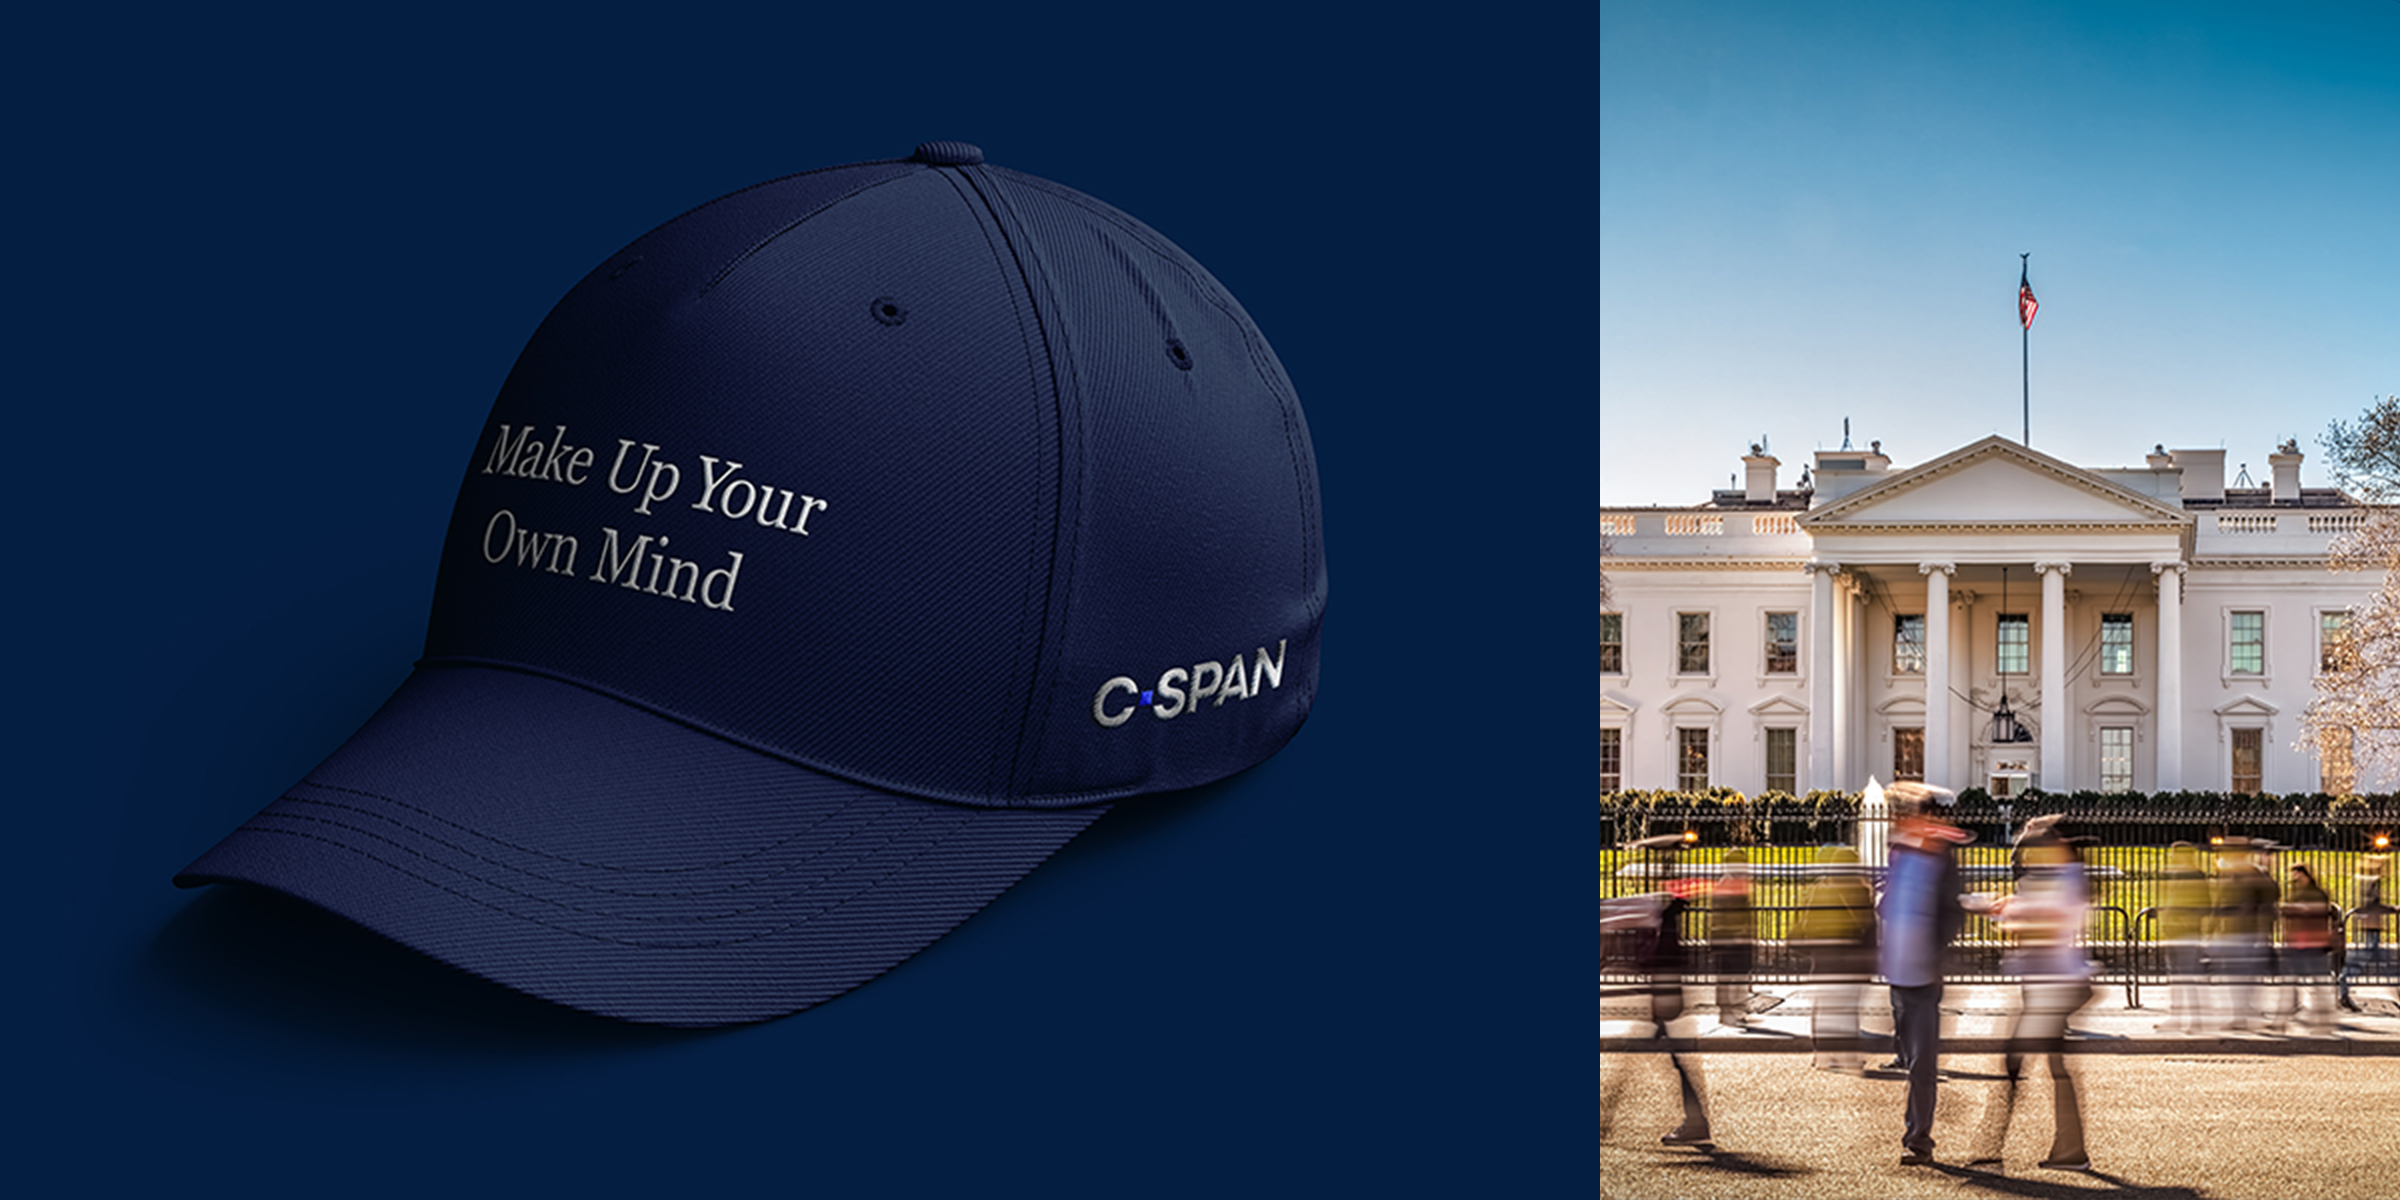 Make up your own mind cspan hat next to White House